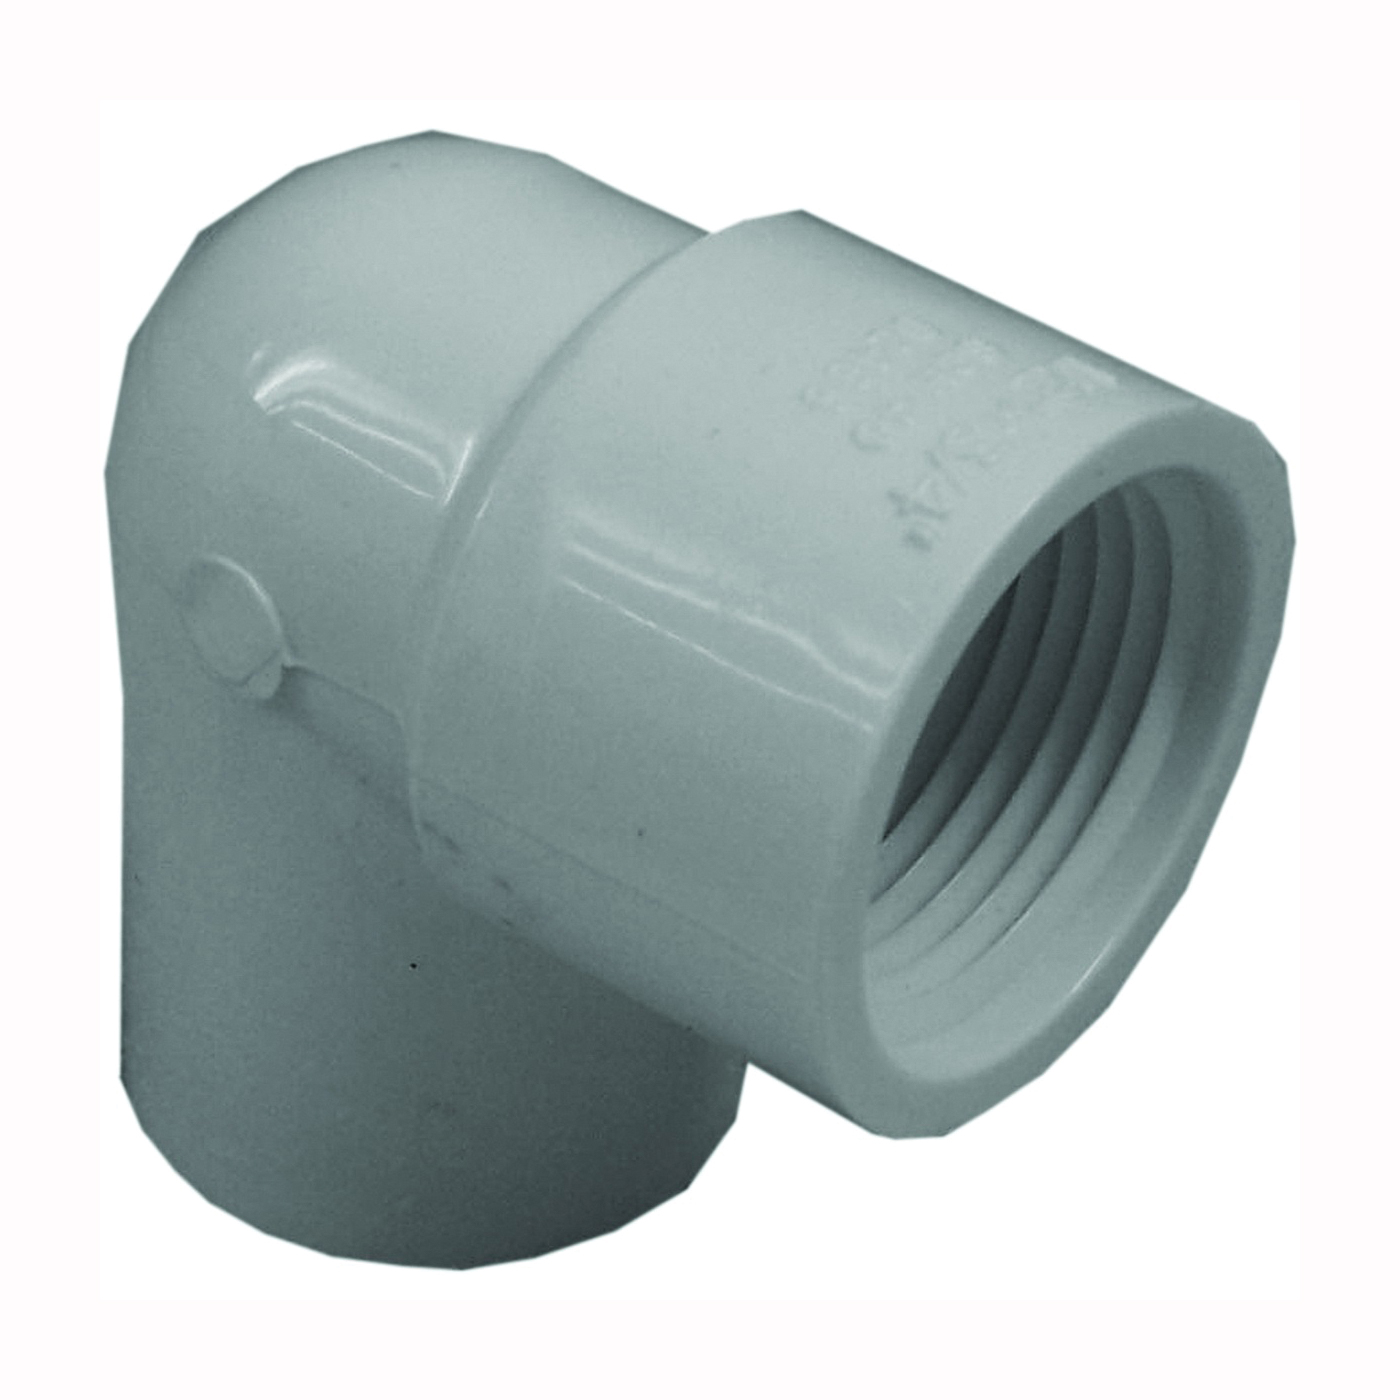 300 Series 34157 Reducing Pipe Elbow, 1/2 x 3/4 in, Slip x FIP, 90 deg Angle, PVC, White, SCH 40 Schedule